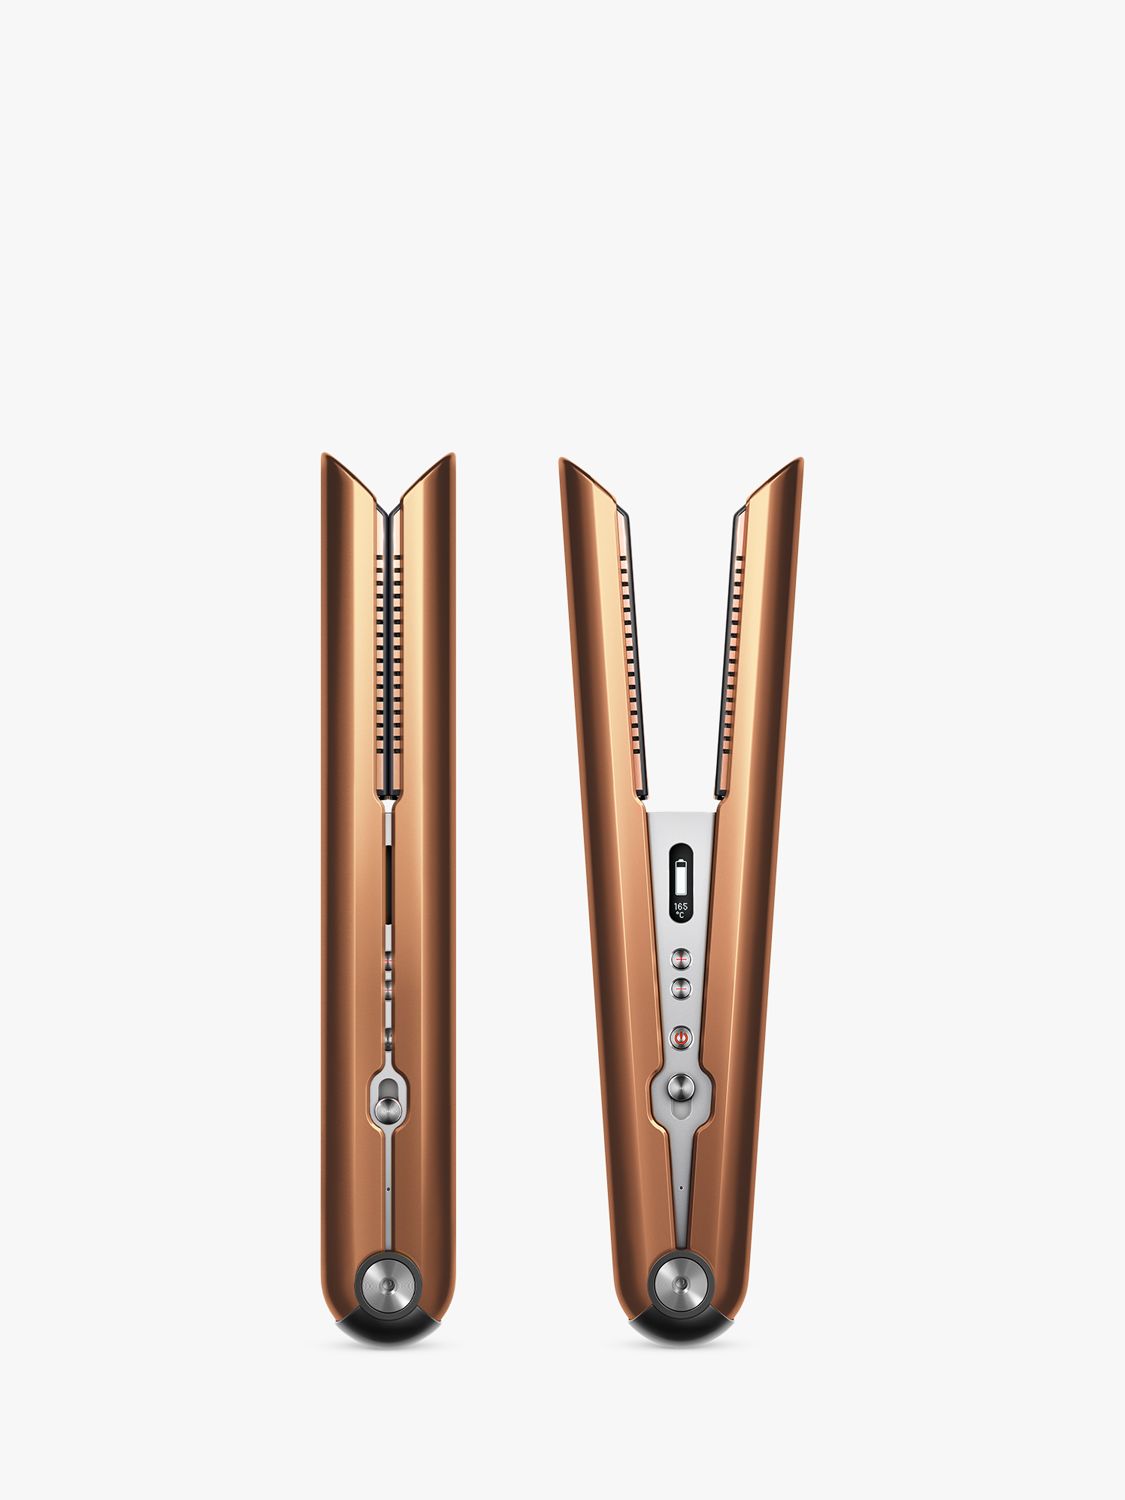 Dyson Corrale™ HS07 Cord-Free Hair Straighteners, Copper/Nickel